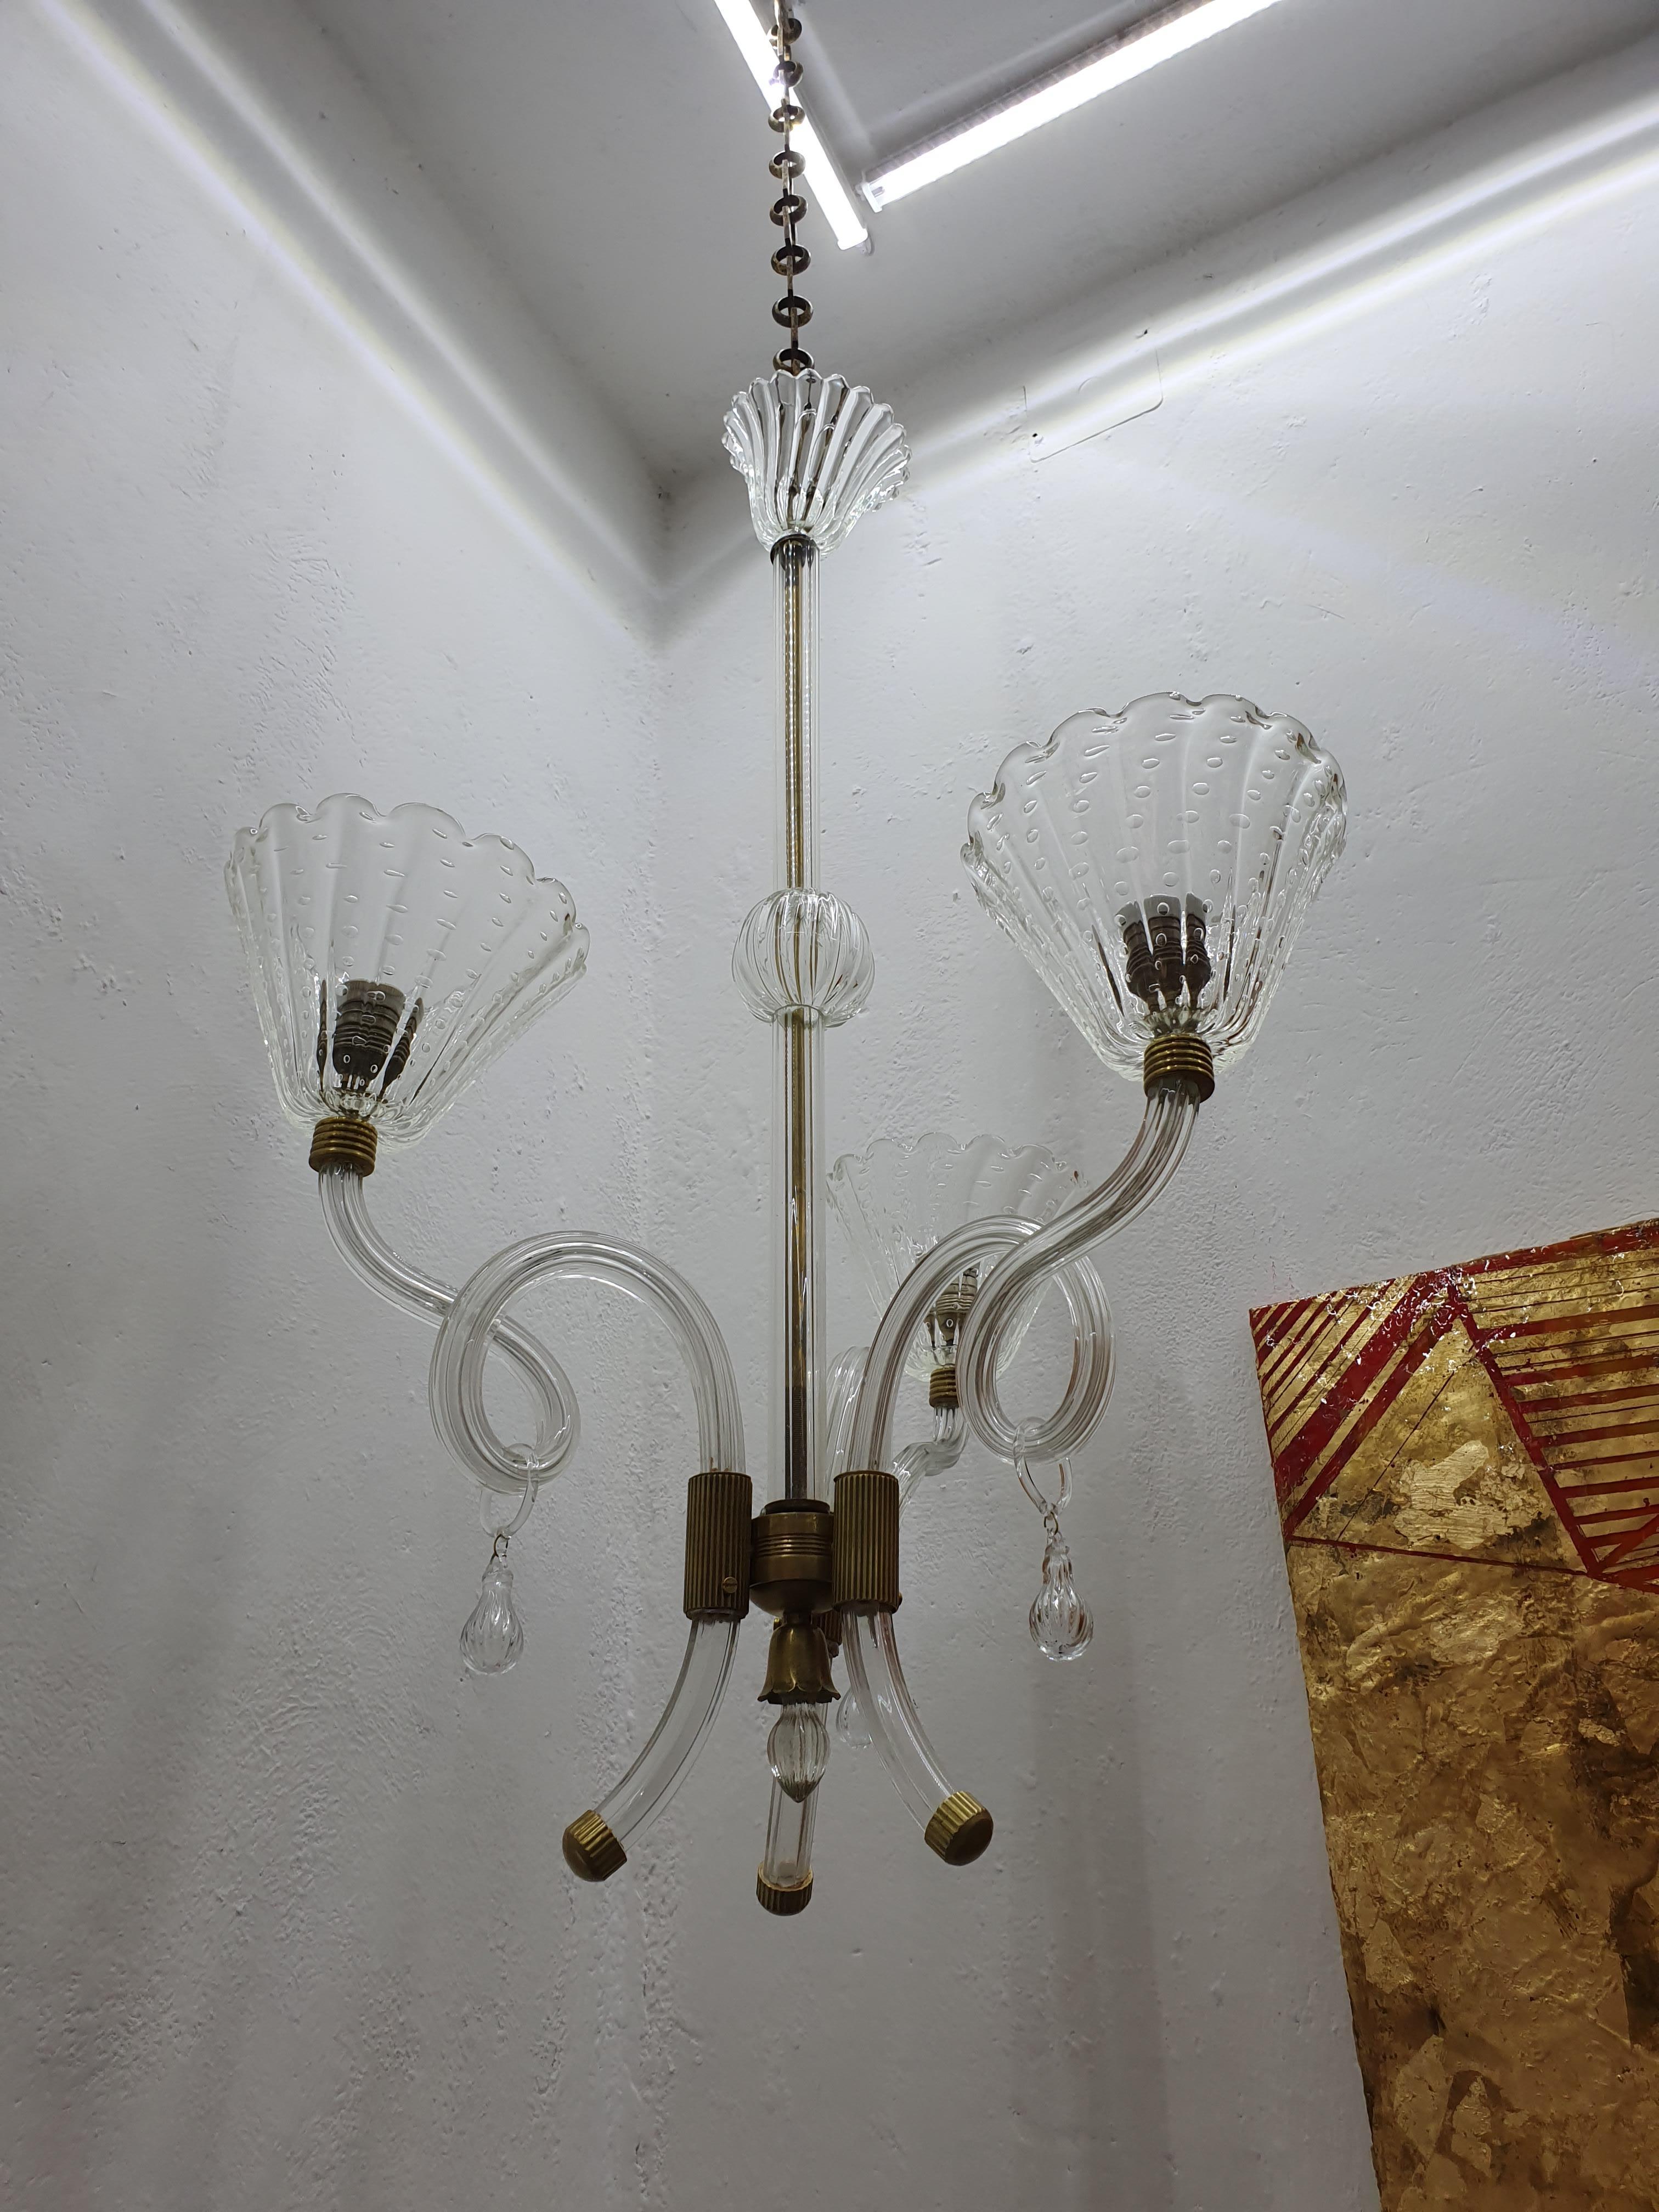 Mid-Century Modern Chandelier by Barovier Toso in Murano Glass, Italy circa 1950 For Sale 4